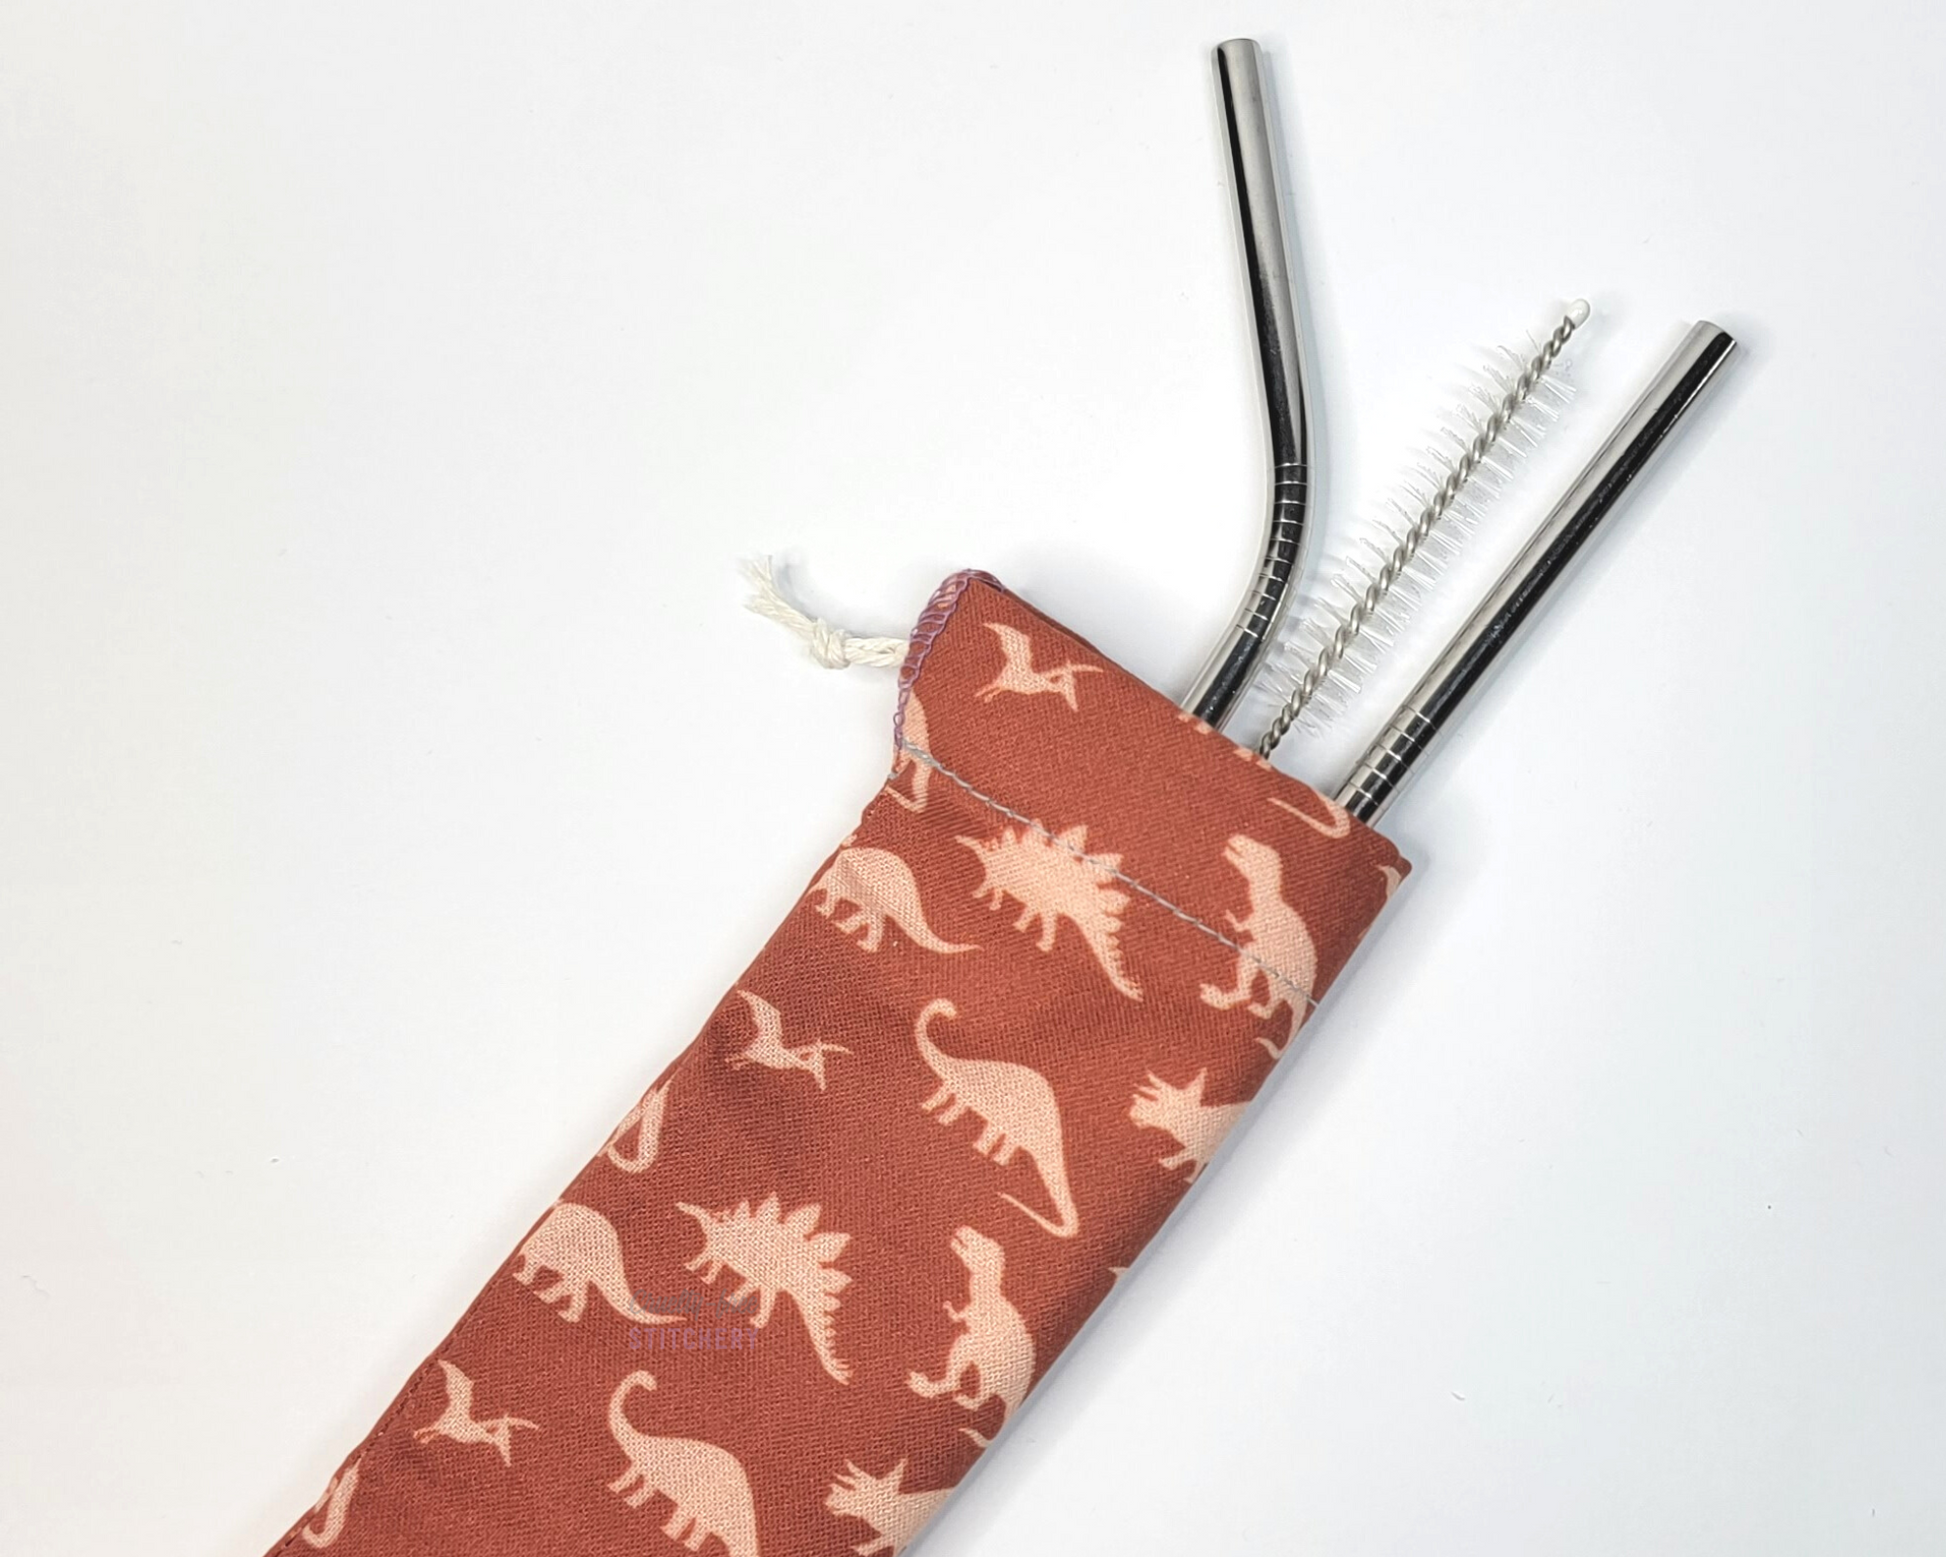 Reusable straw pouch with stainless steel straws sticking out the top. The fabric of the pouch is dark orange with light orange dinosaurs and it has a drawstring closure.